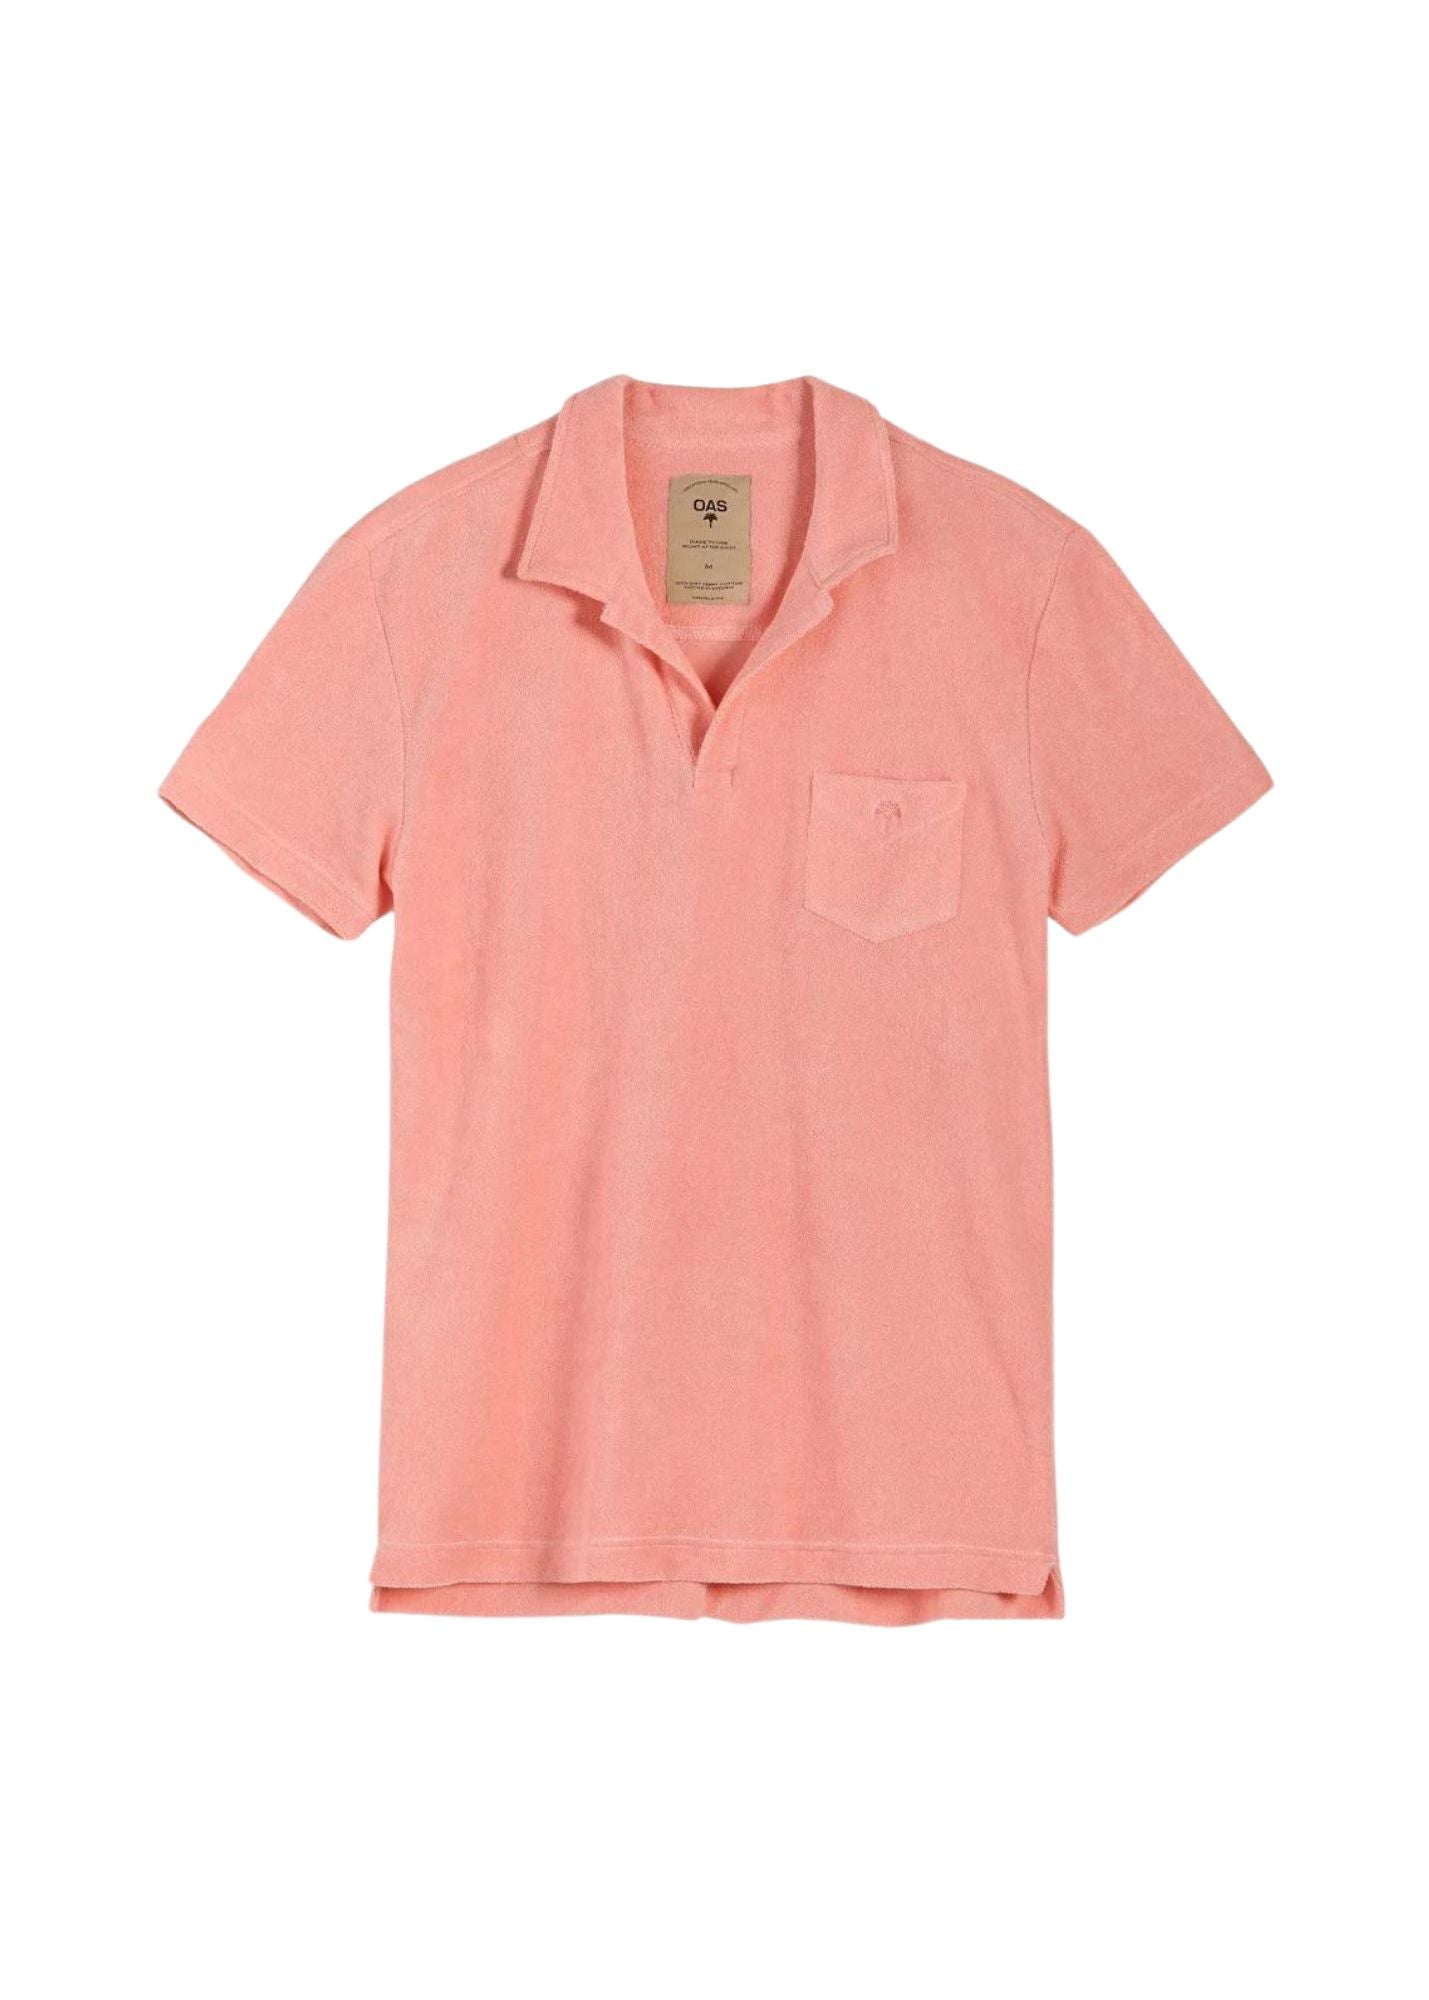 OAS NEW PINK POLO TERRY SHIRT